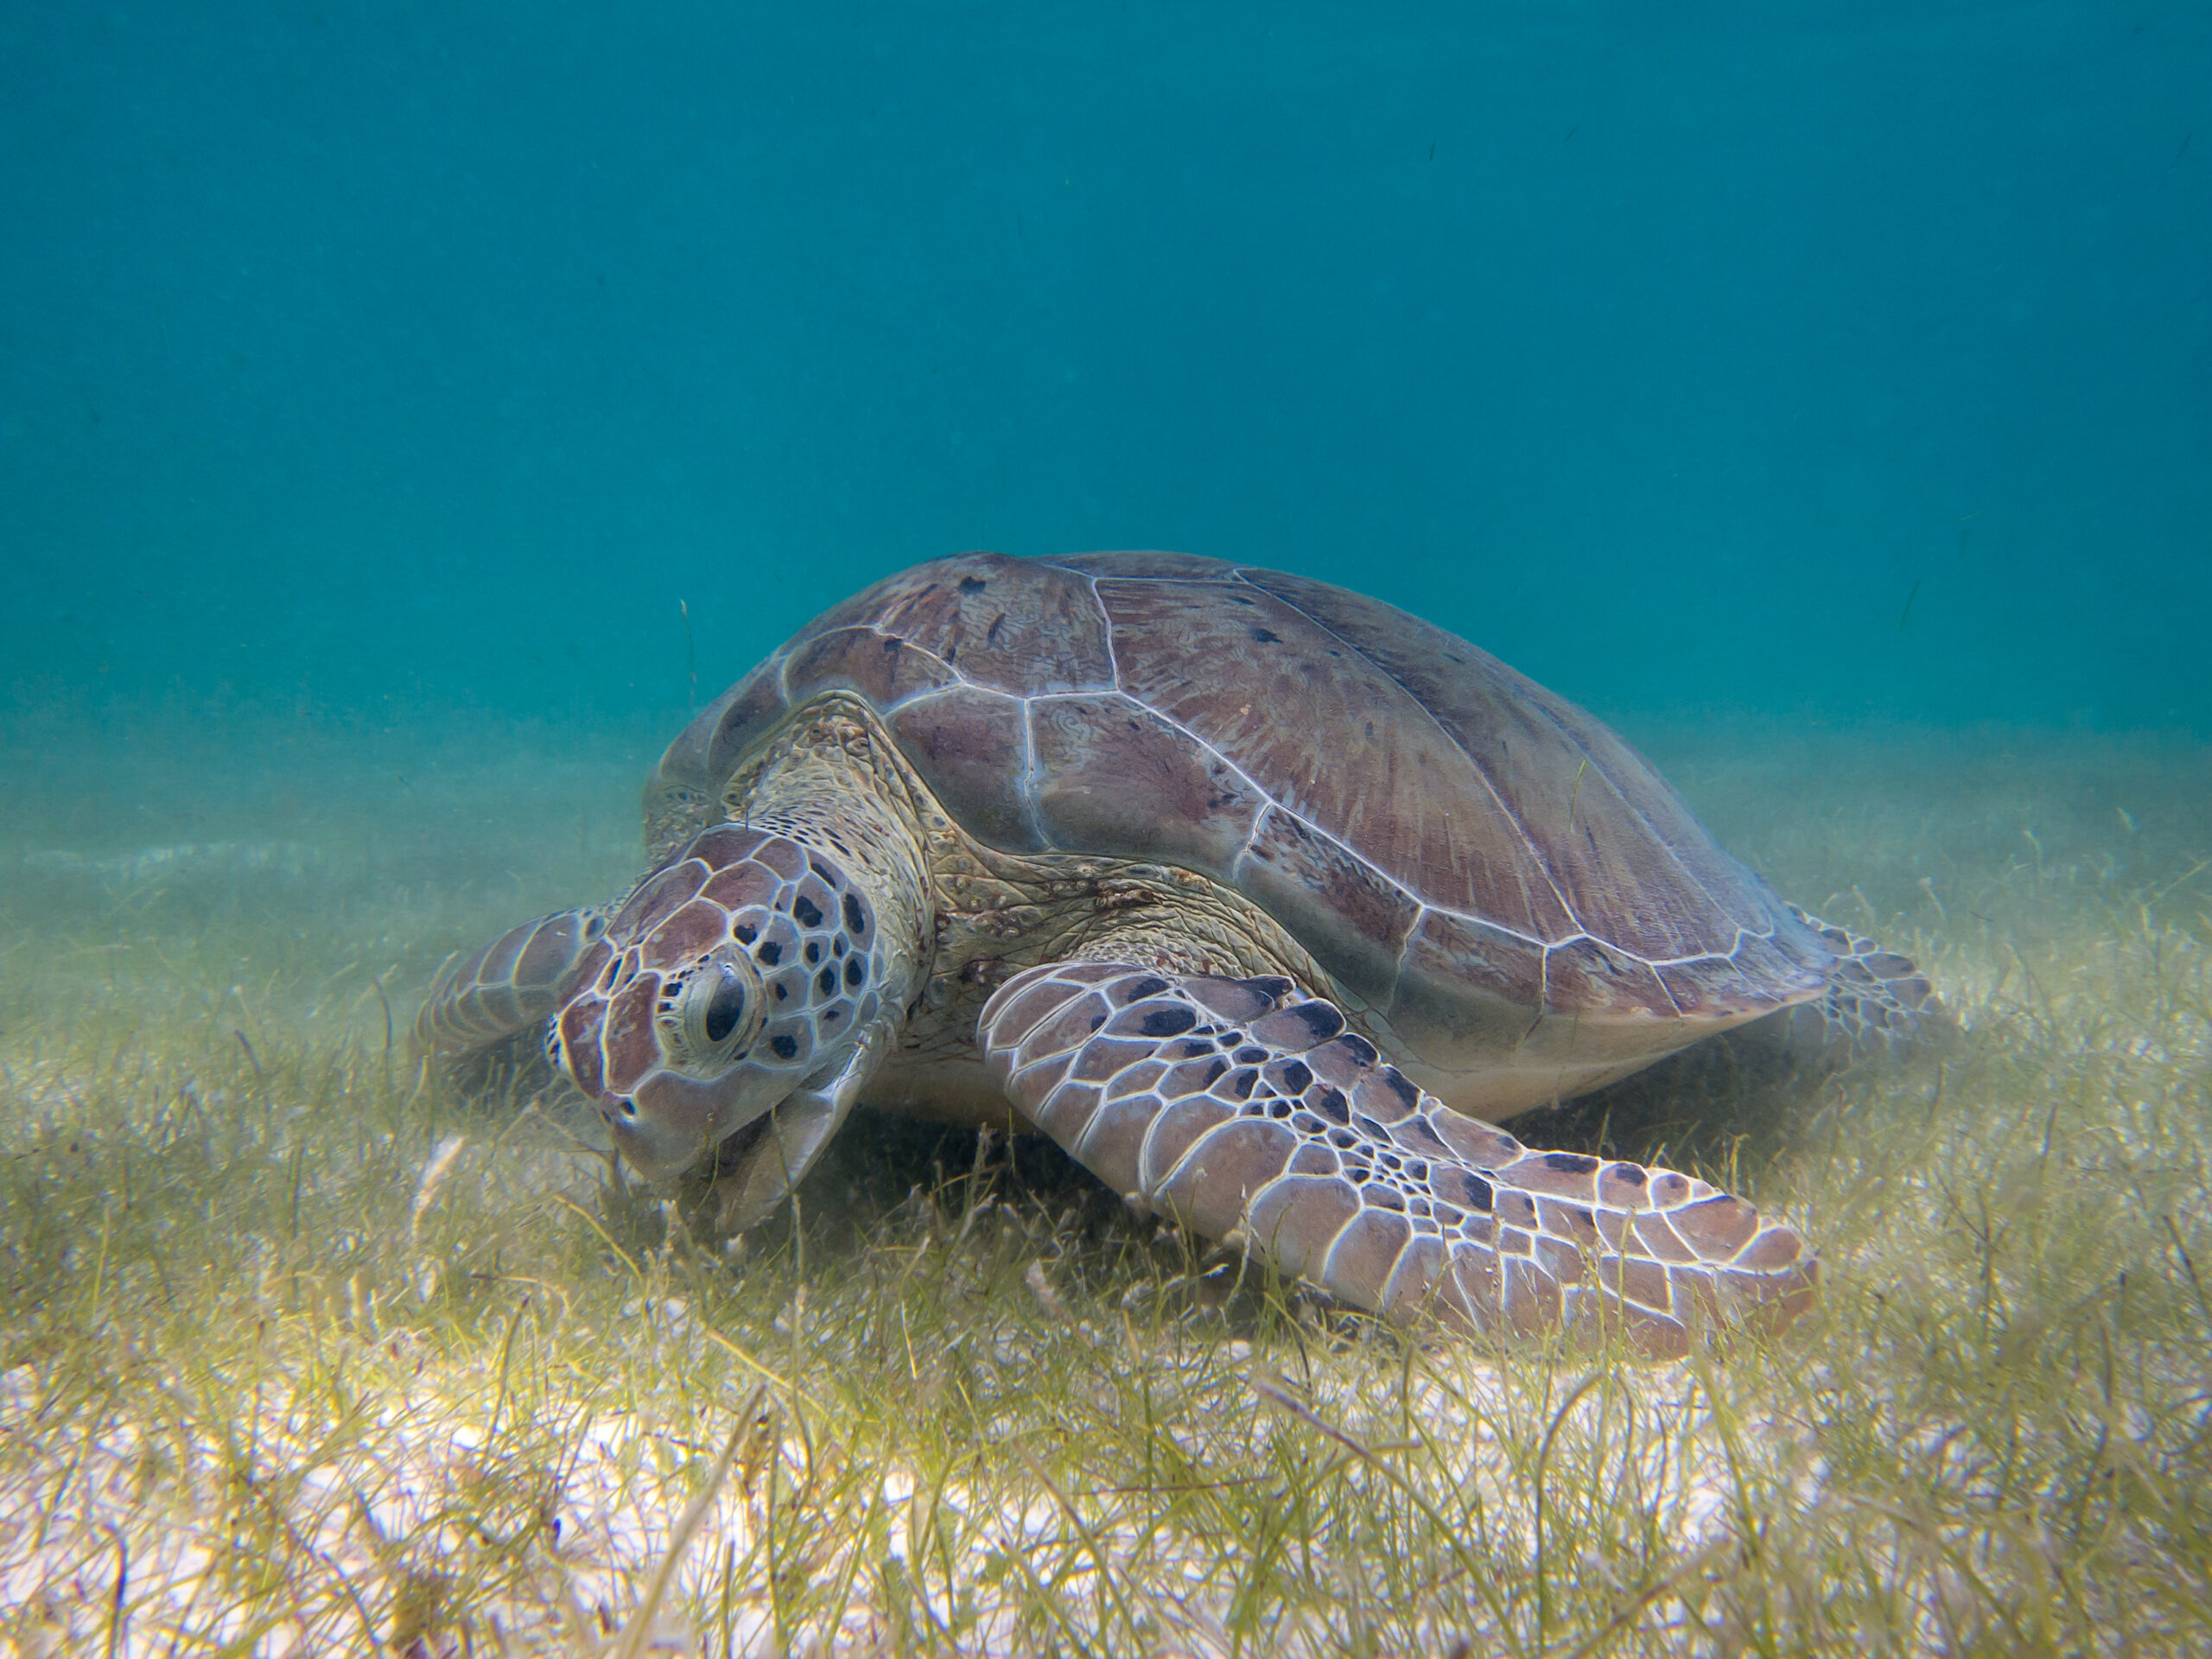 Green Sea Turtles Mistake Plastic for Food, Study Finds